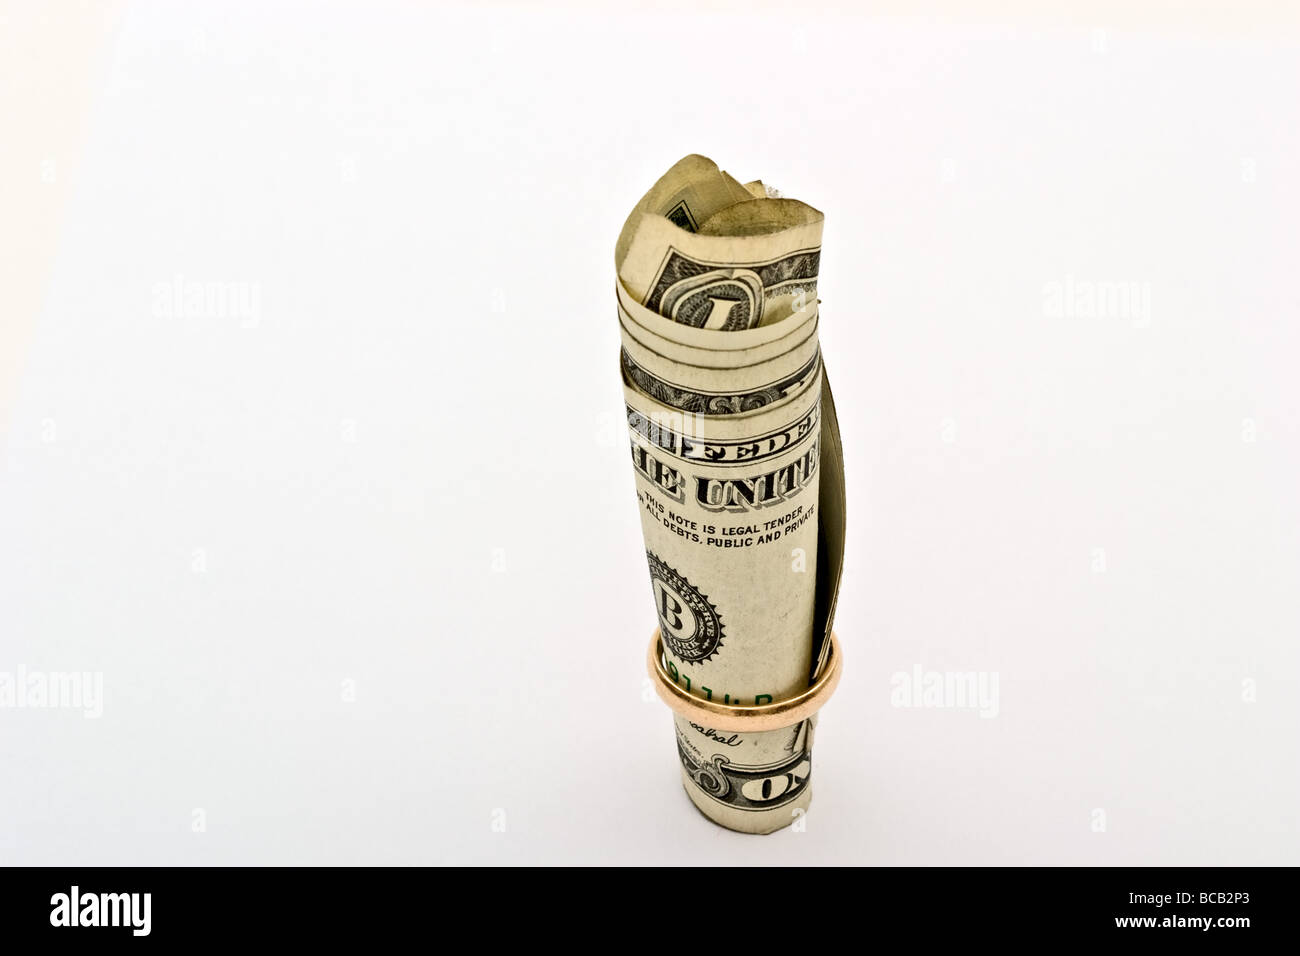 Roll of dollar bills with a gold wedding ring at the bottom Stock Photo